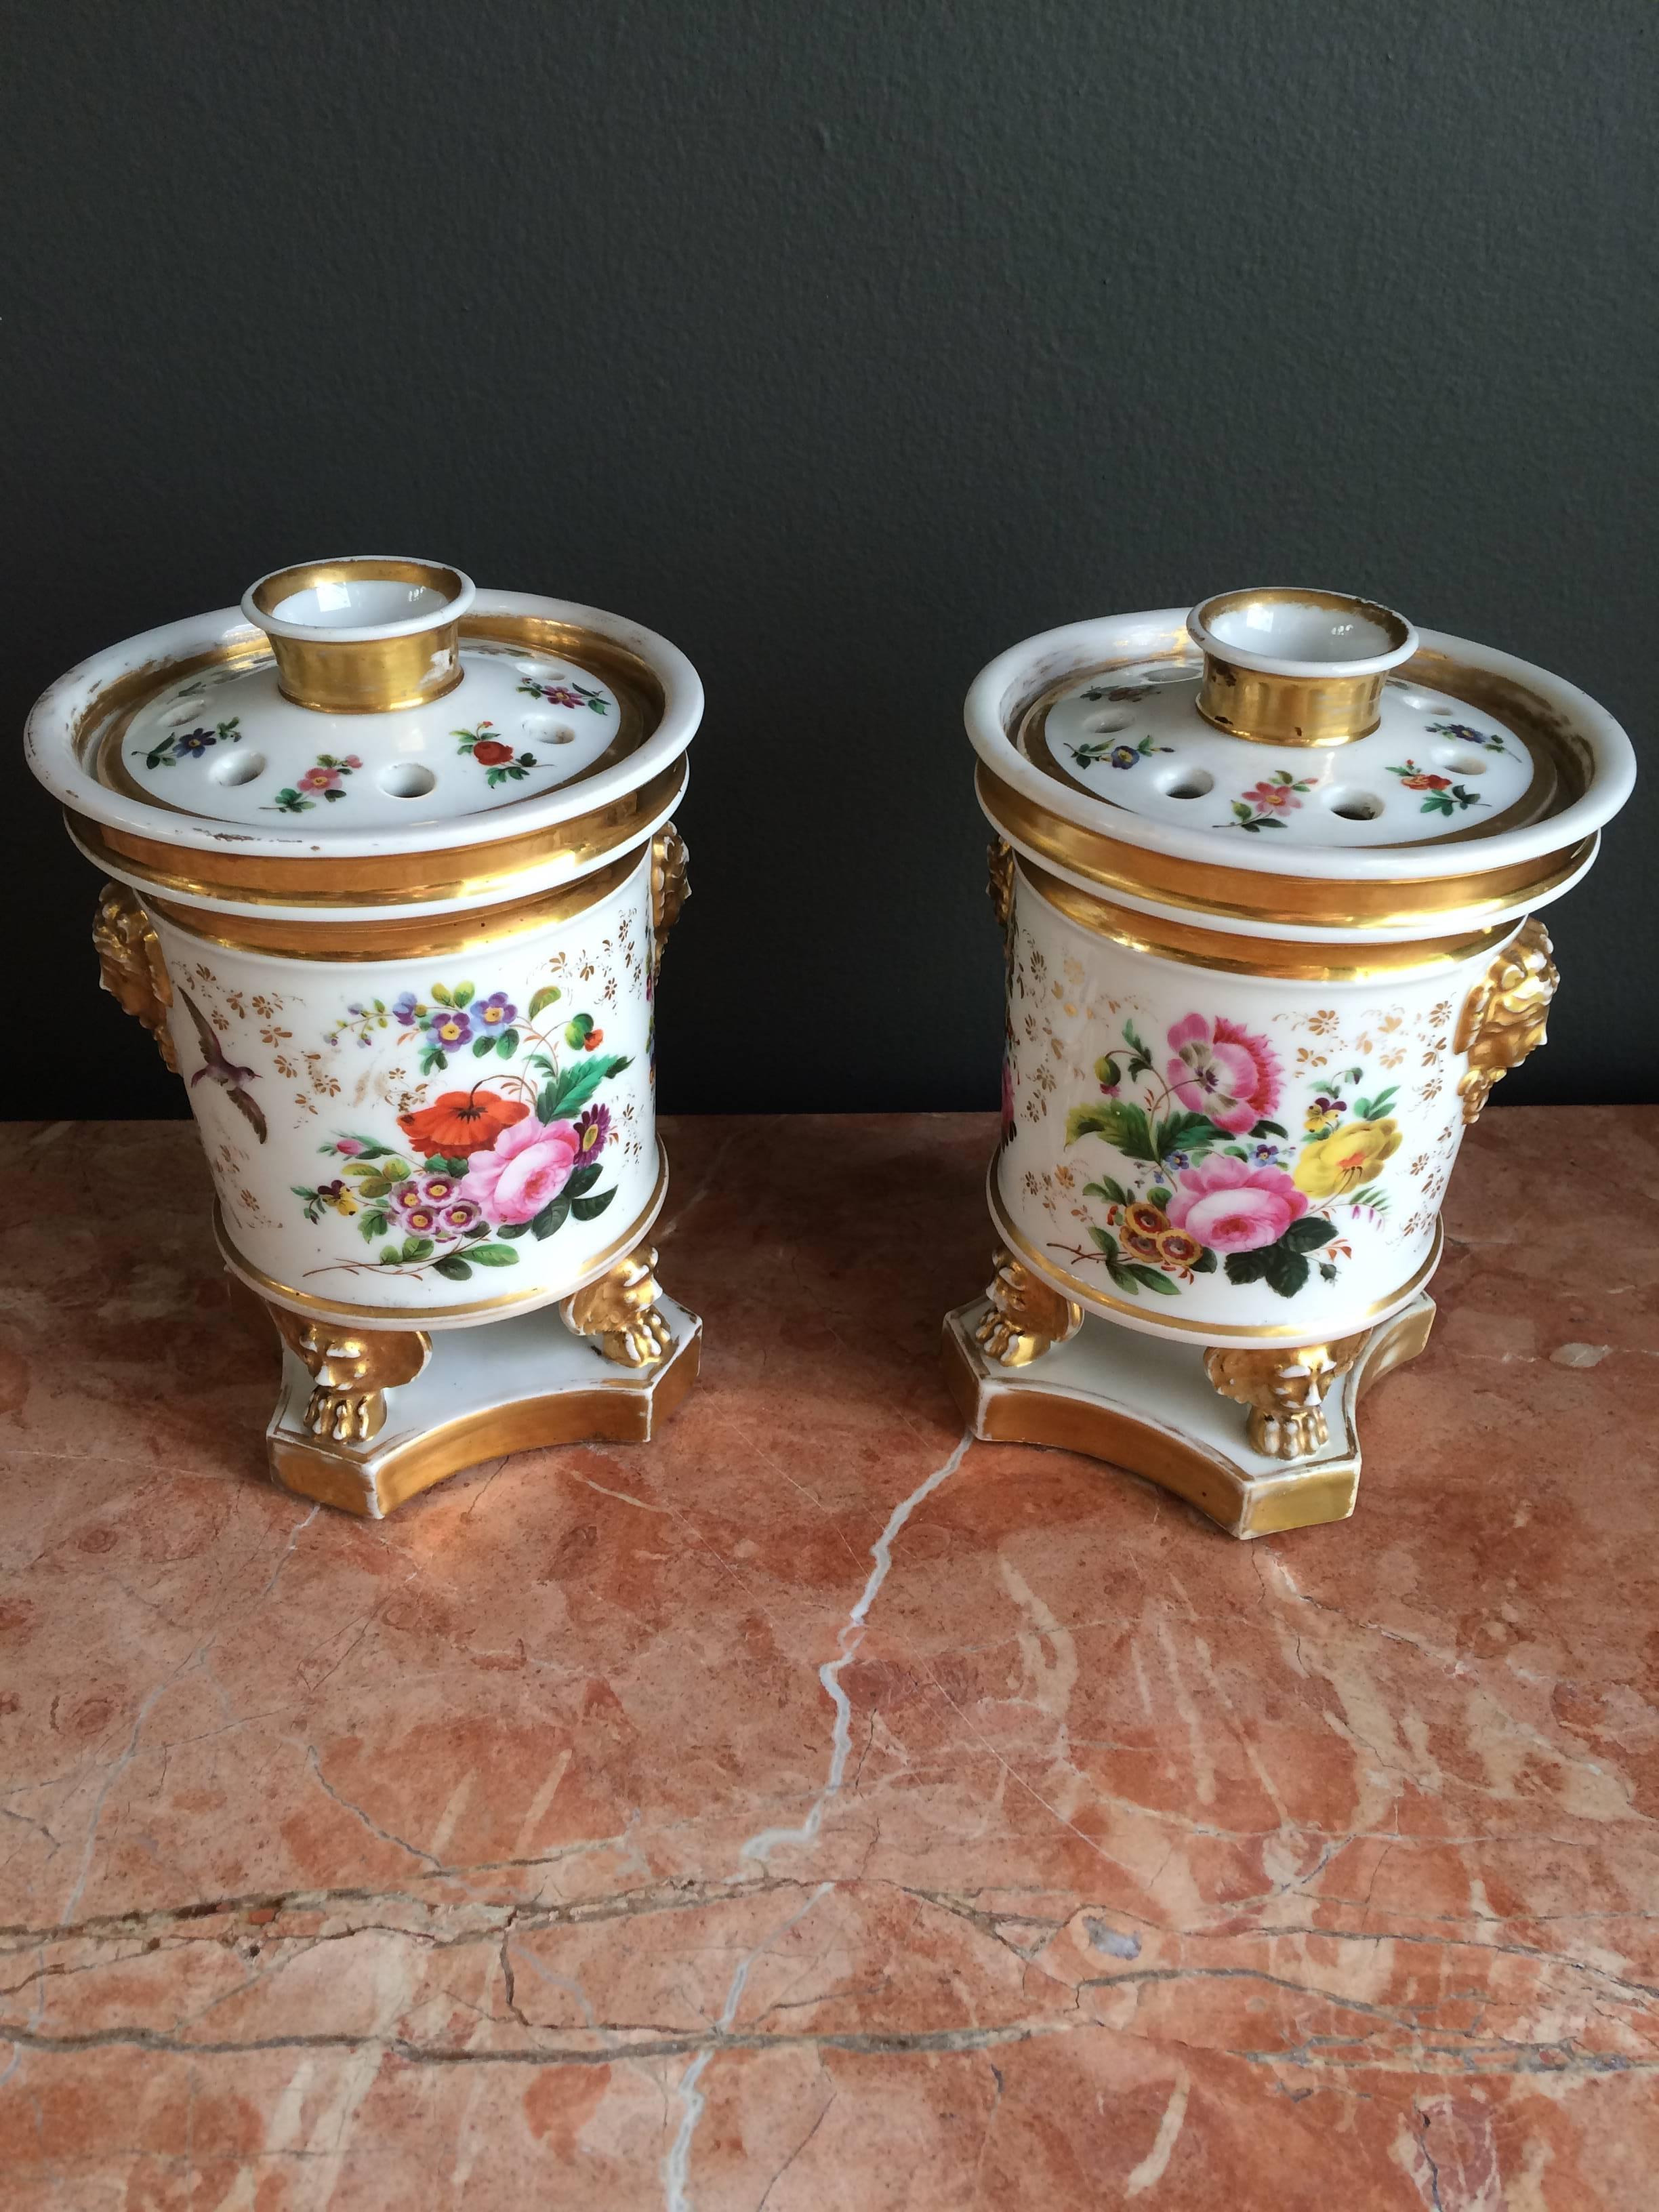 A charming pair of footedbcircular floral design potpourris with gold trim and decorative mounted masks on either side with removable lids.